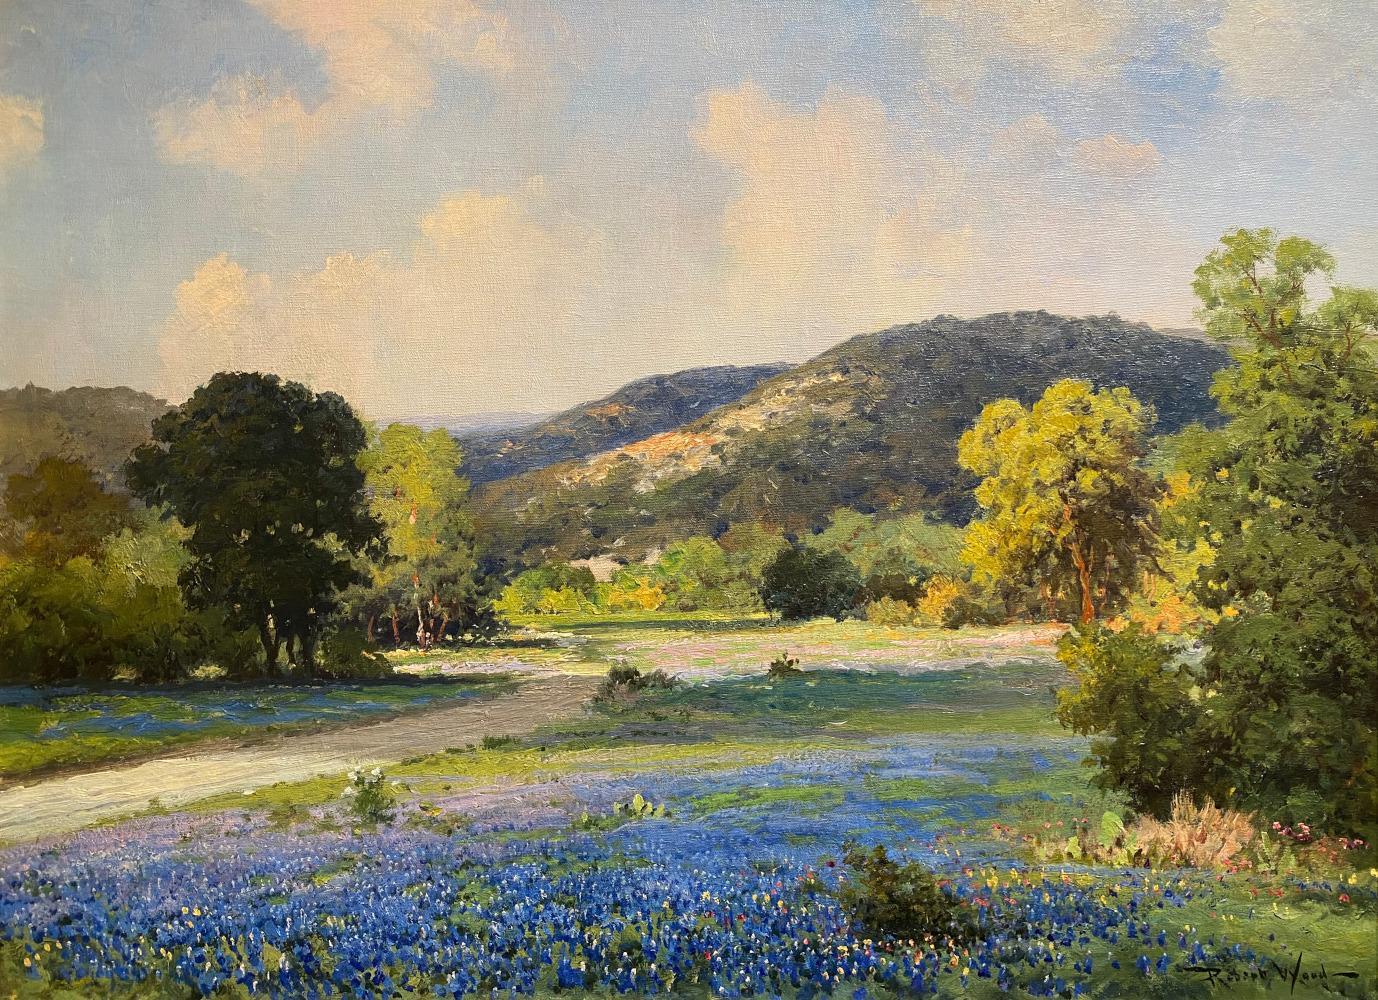 Robert William Wood Landscape Painting - "PATH THROUGH THE BLUE" BLUEBONNET TEXAS HILL COUNTRY IMAGE: 23 X 31 CIRCA 1940S